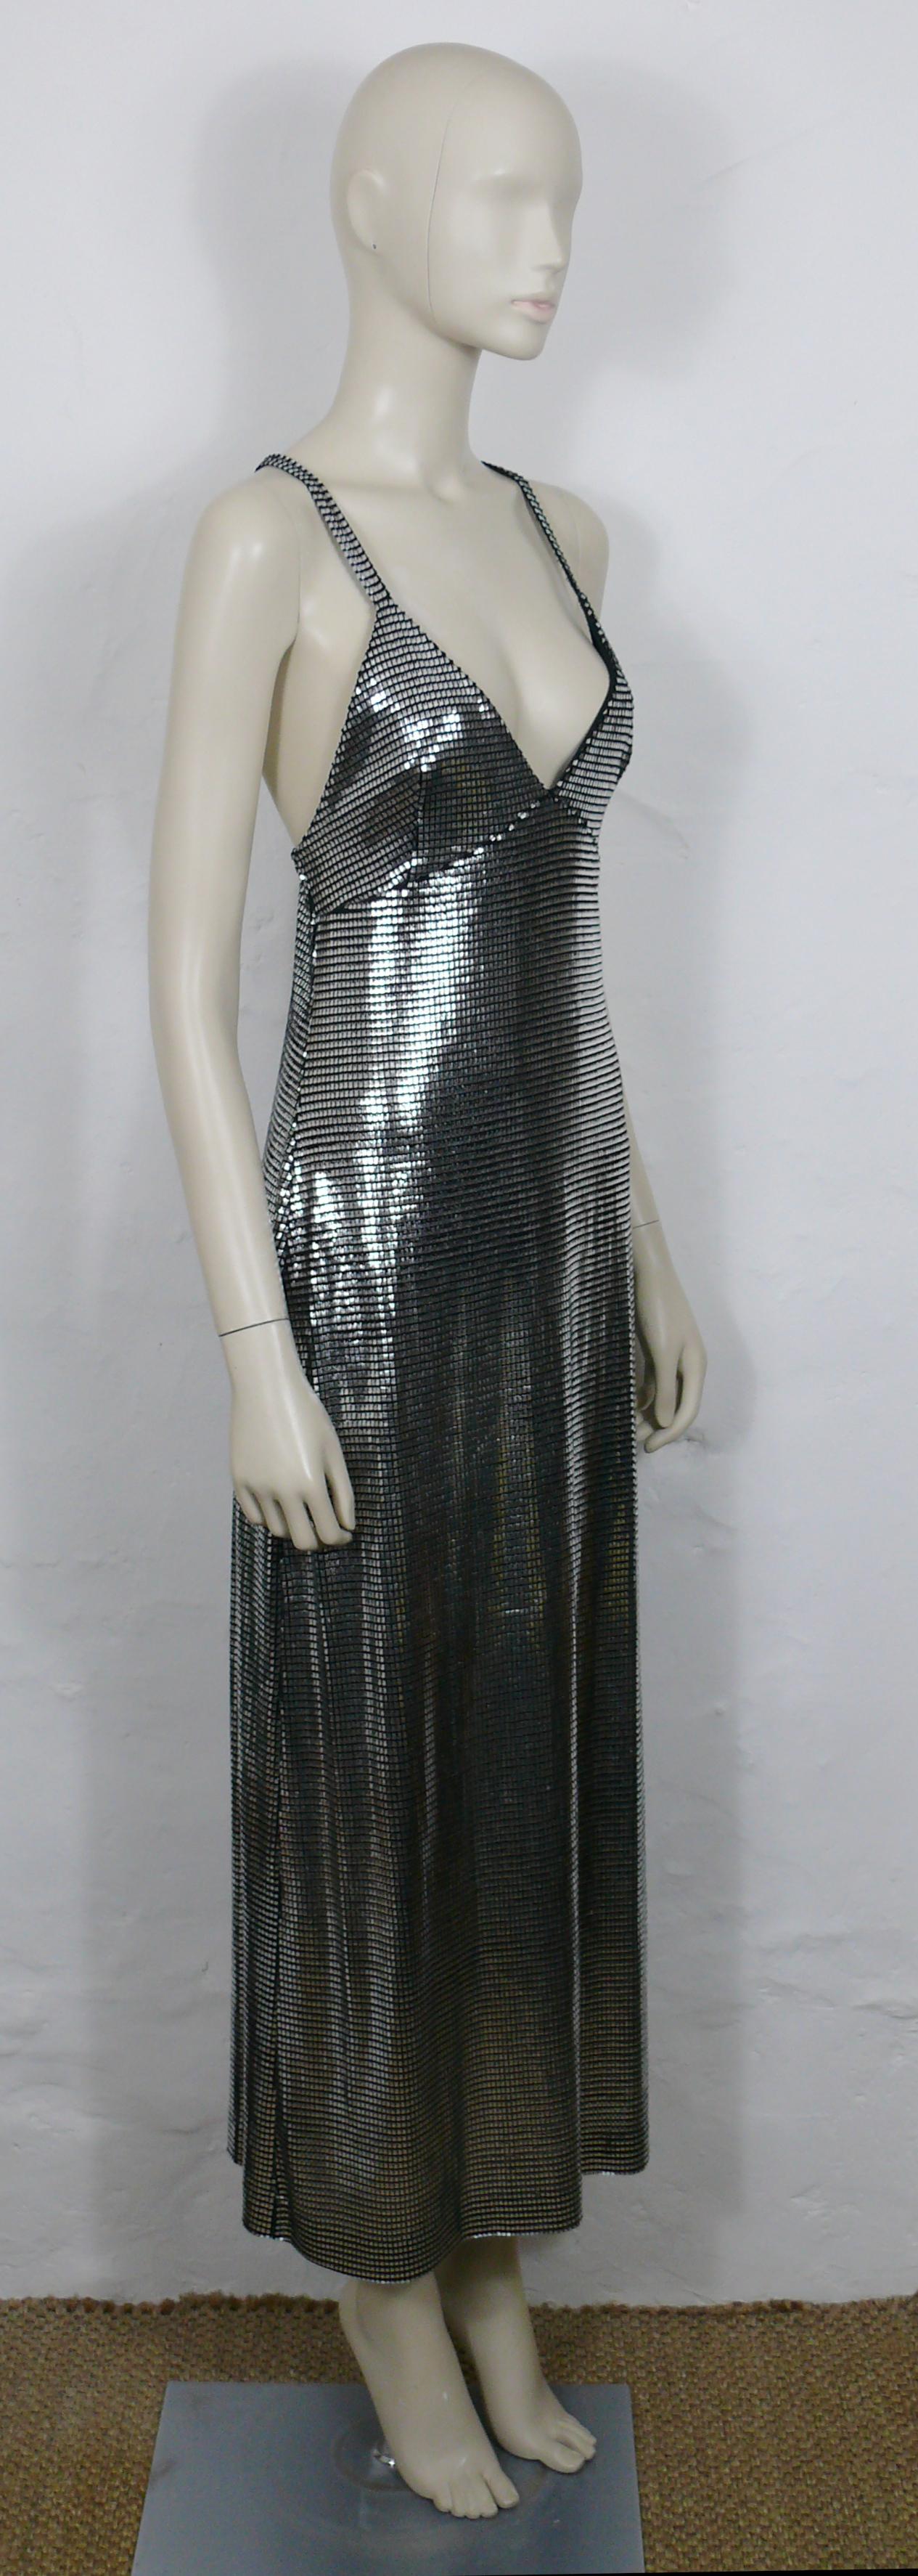 PACO RABANNE silver foil grid maxi dress.

Top surface is silver foil printed creating a metallic chain mail effect on a black knit spandex base.

Bodycon cut.
Ankle length.
Cross back shoulder straps.

Label reads PACO RABANNE Paris.
Made in